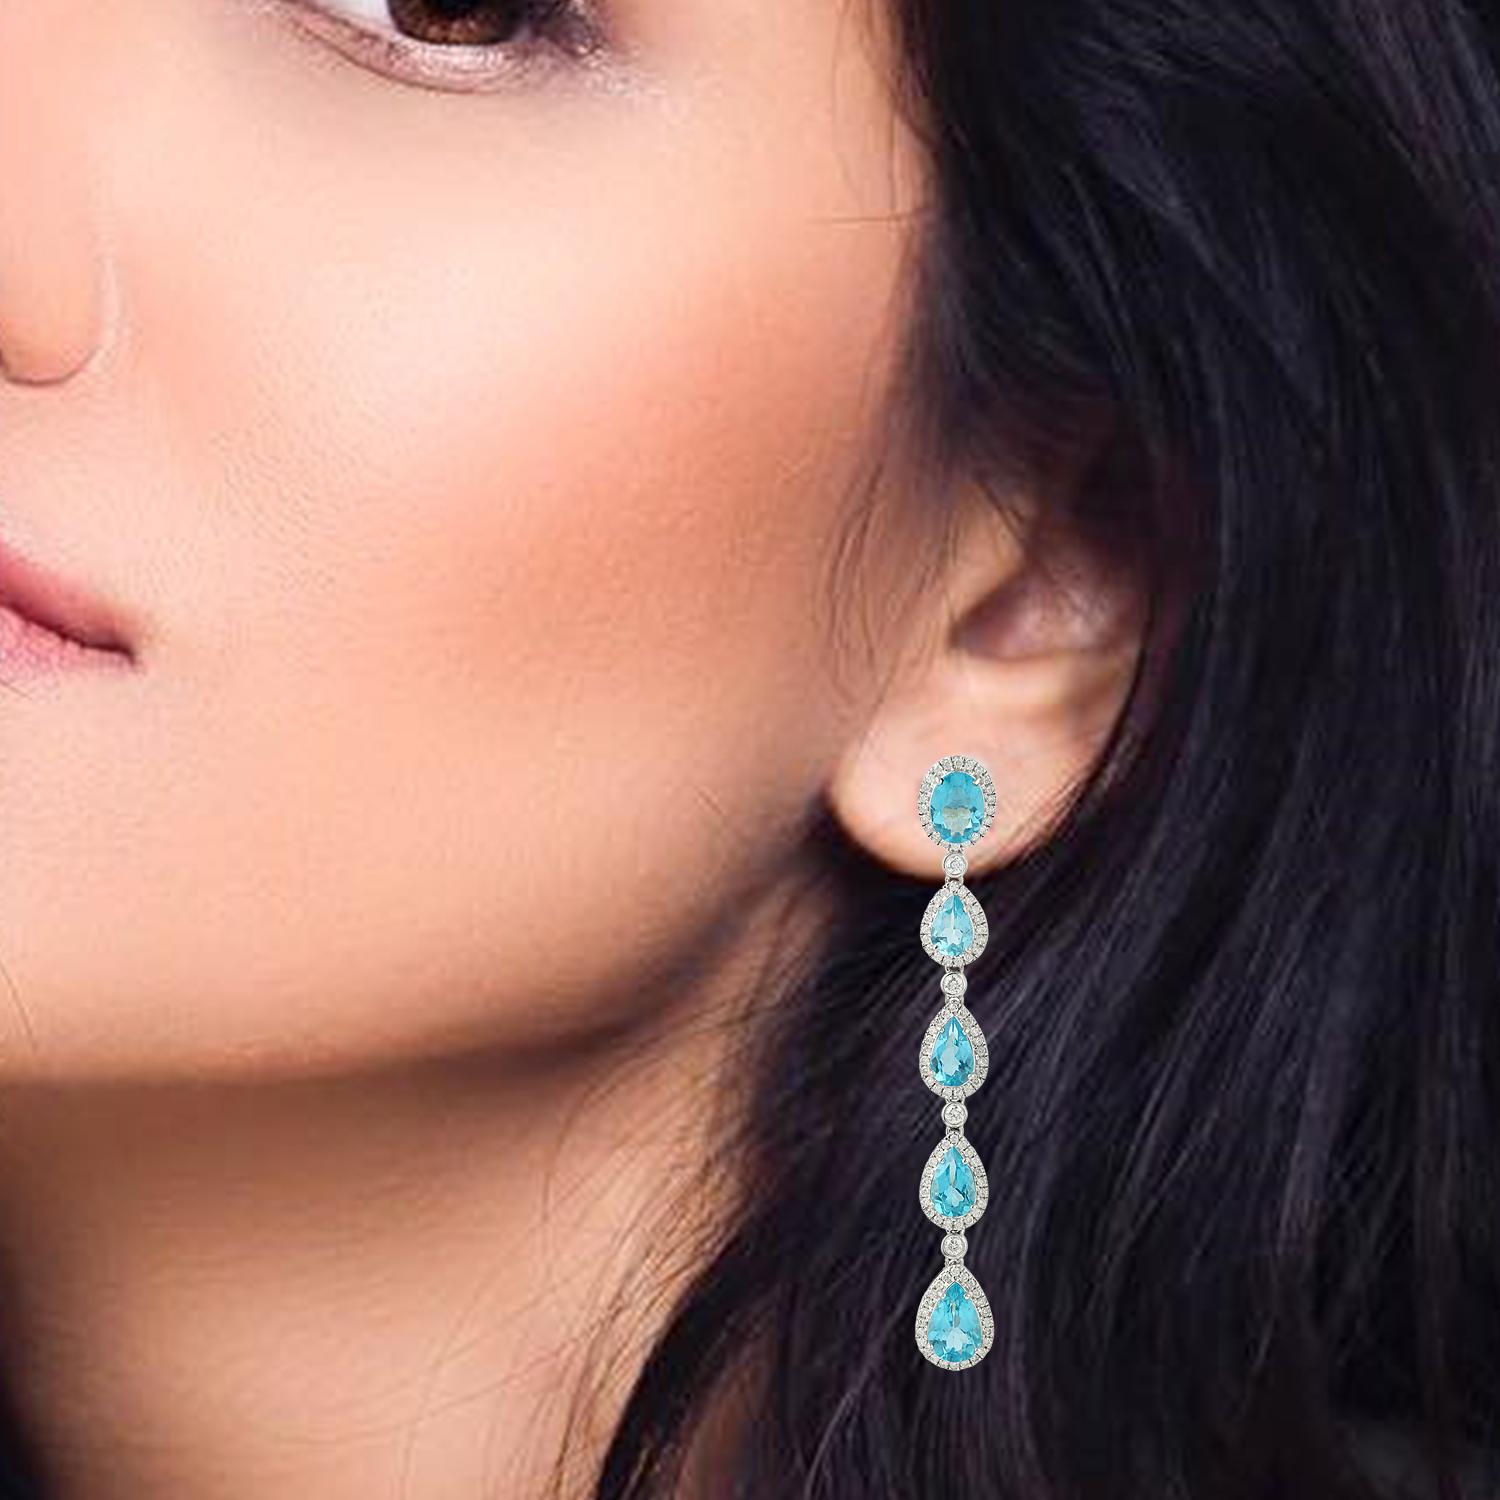 These earrings are handcrafted in 18K gold, 9.93 carats Apatite and 1.52 carats of sparkling diamonds.

FOLLOW  MEGHNA JEWELS storefront to view the latest collection & exclusive pieces.  Meghna Jewels is proudly rated as a Top Seller on 1stdibs